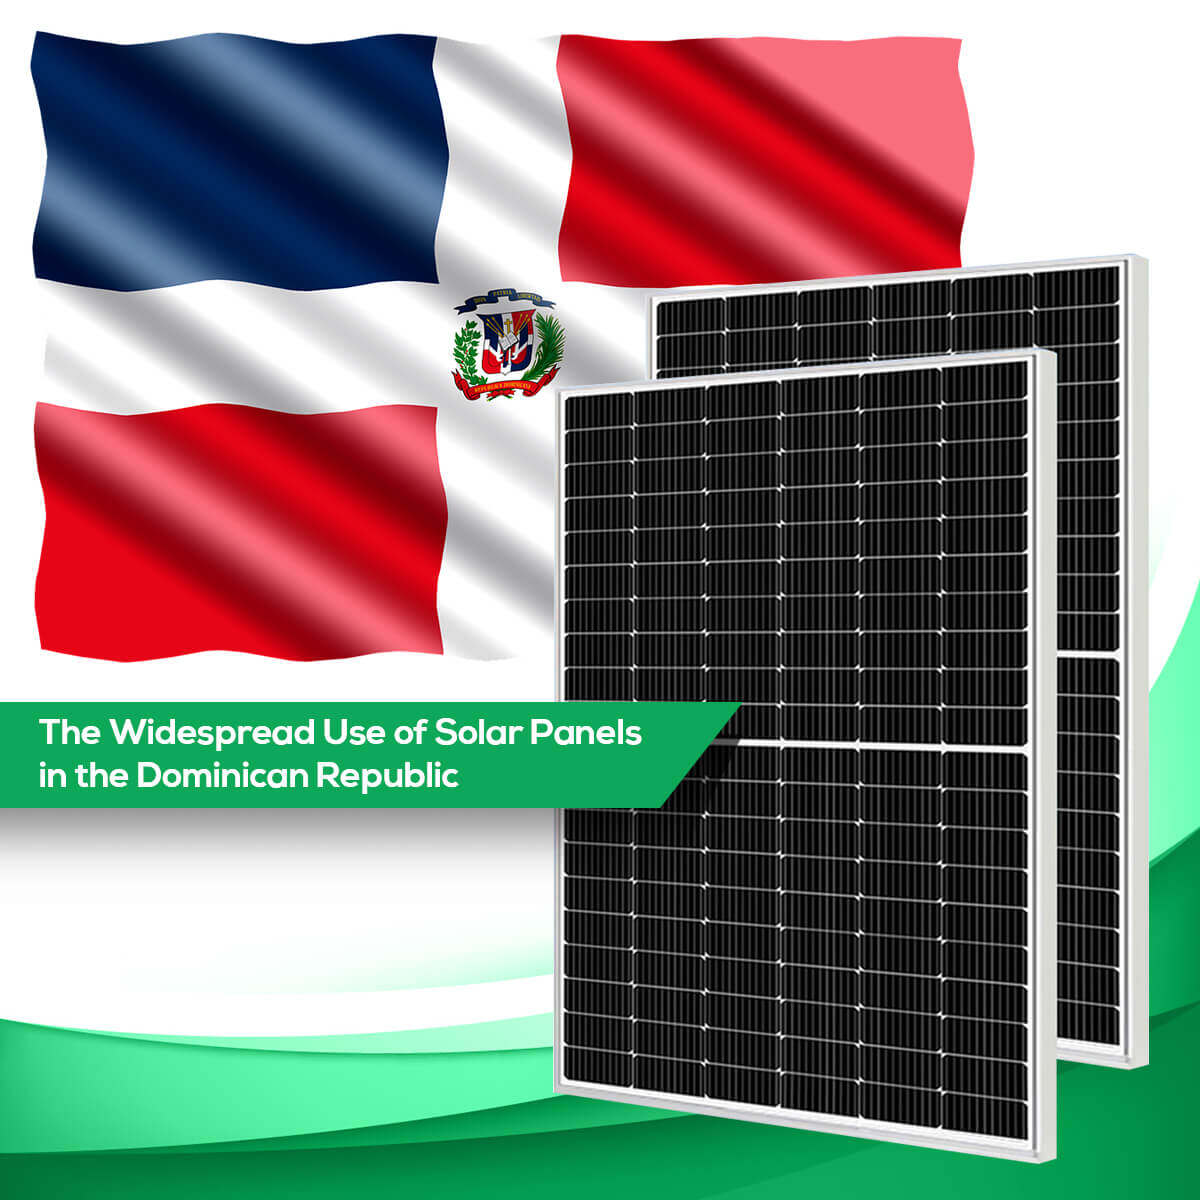 The Widespread Use of Solar Panels in the Dominican Republic